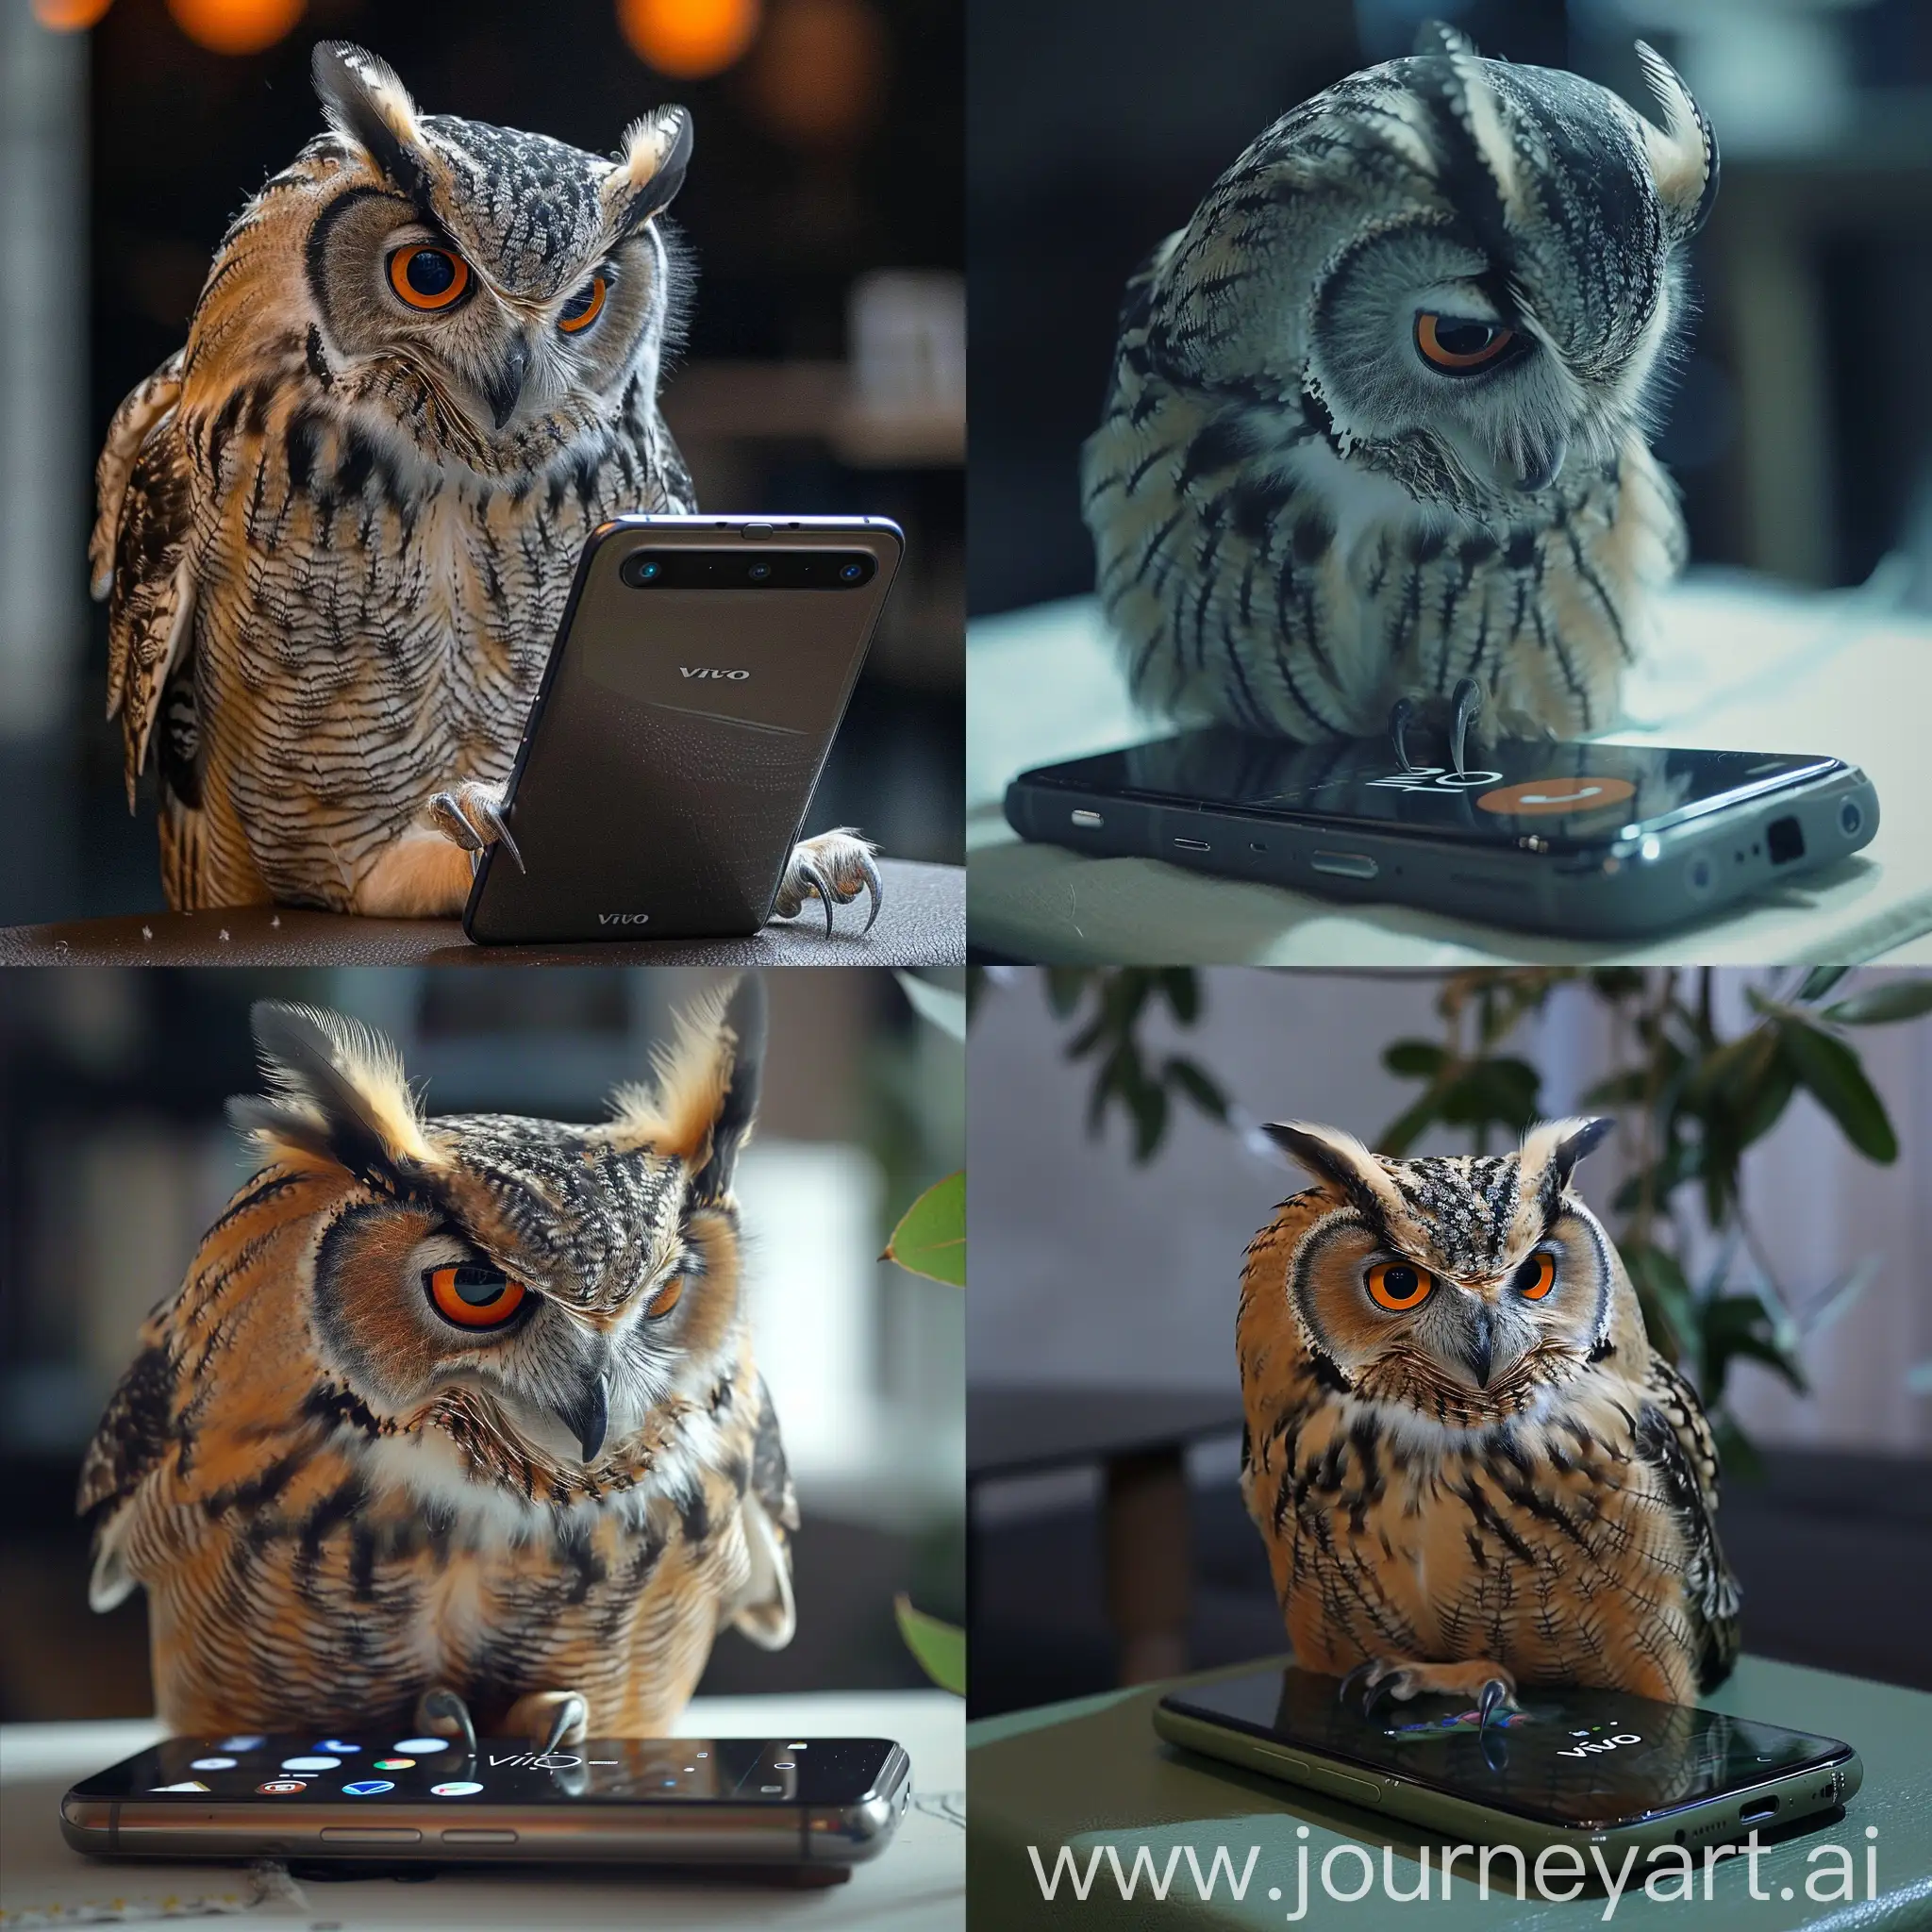 SmartphoneObsessed-Owl-Playful-Bird-Engaged-with-Vivo-Device